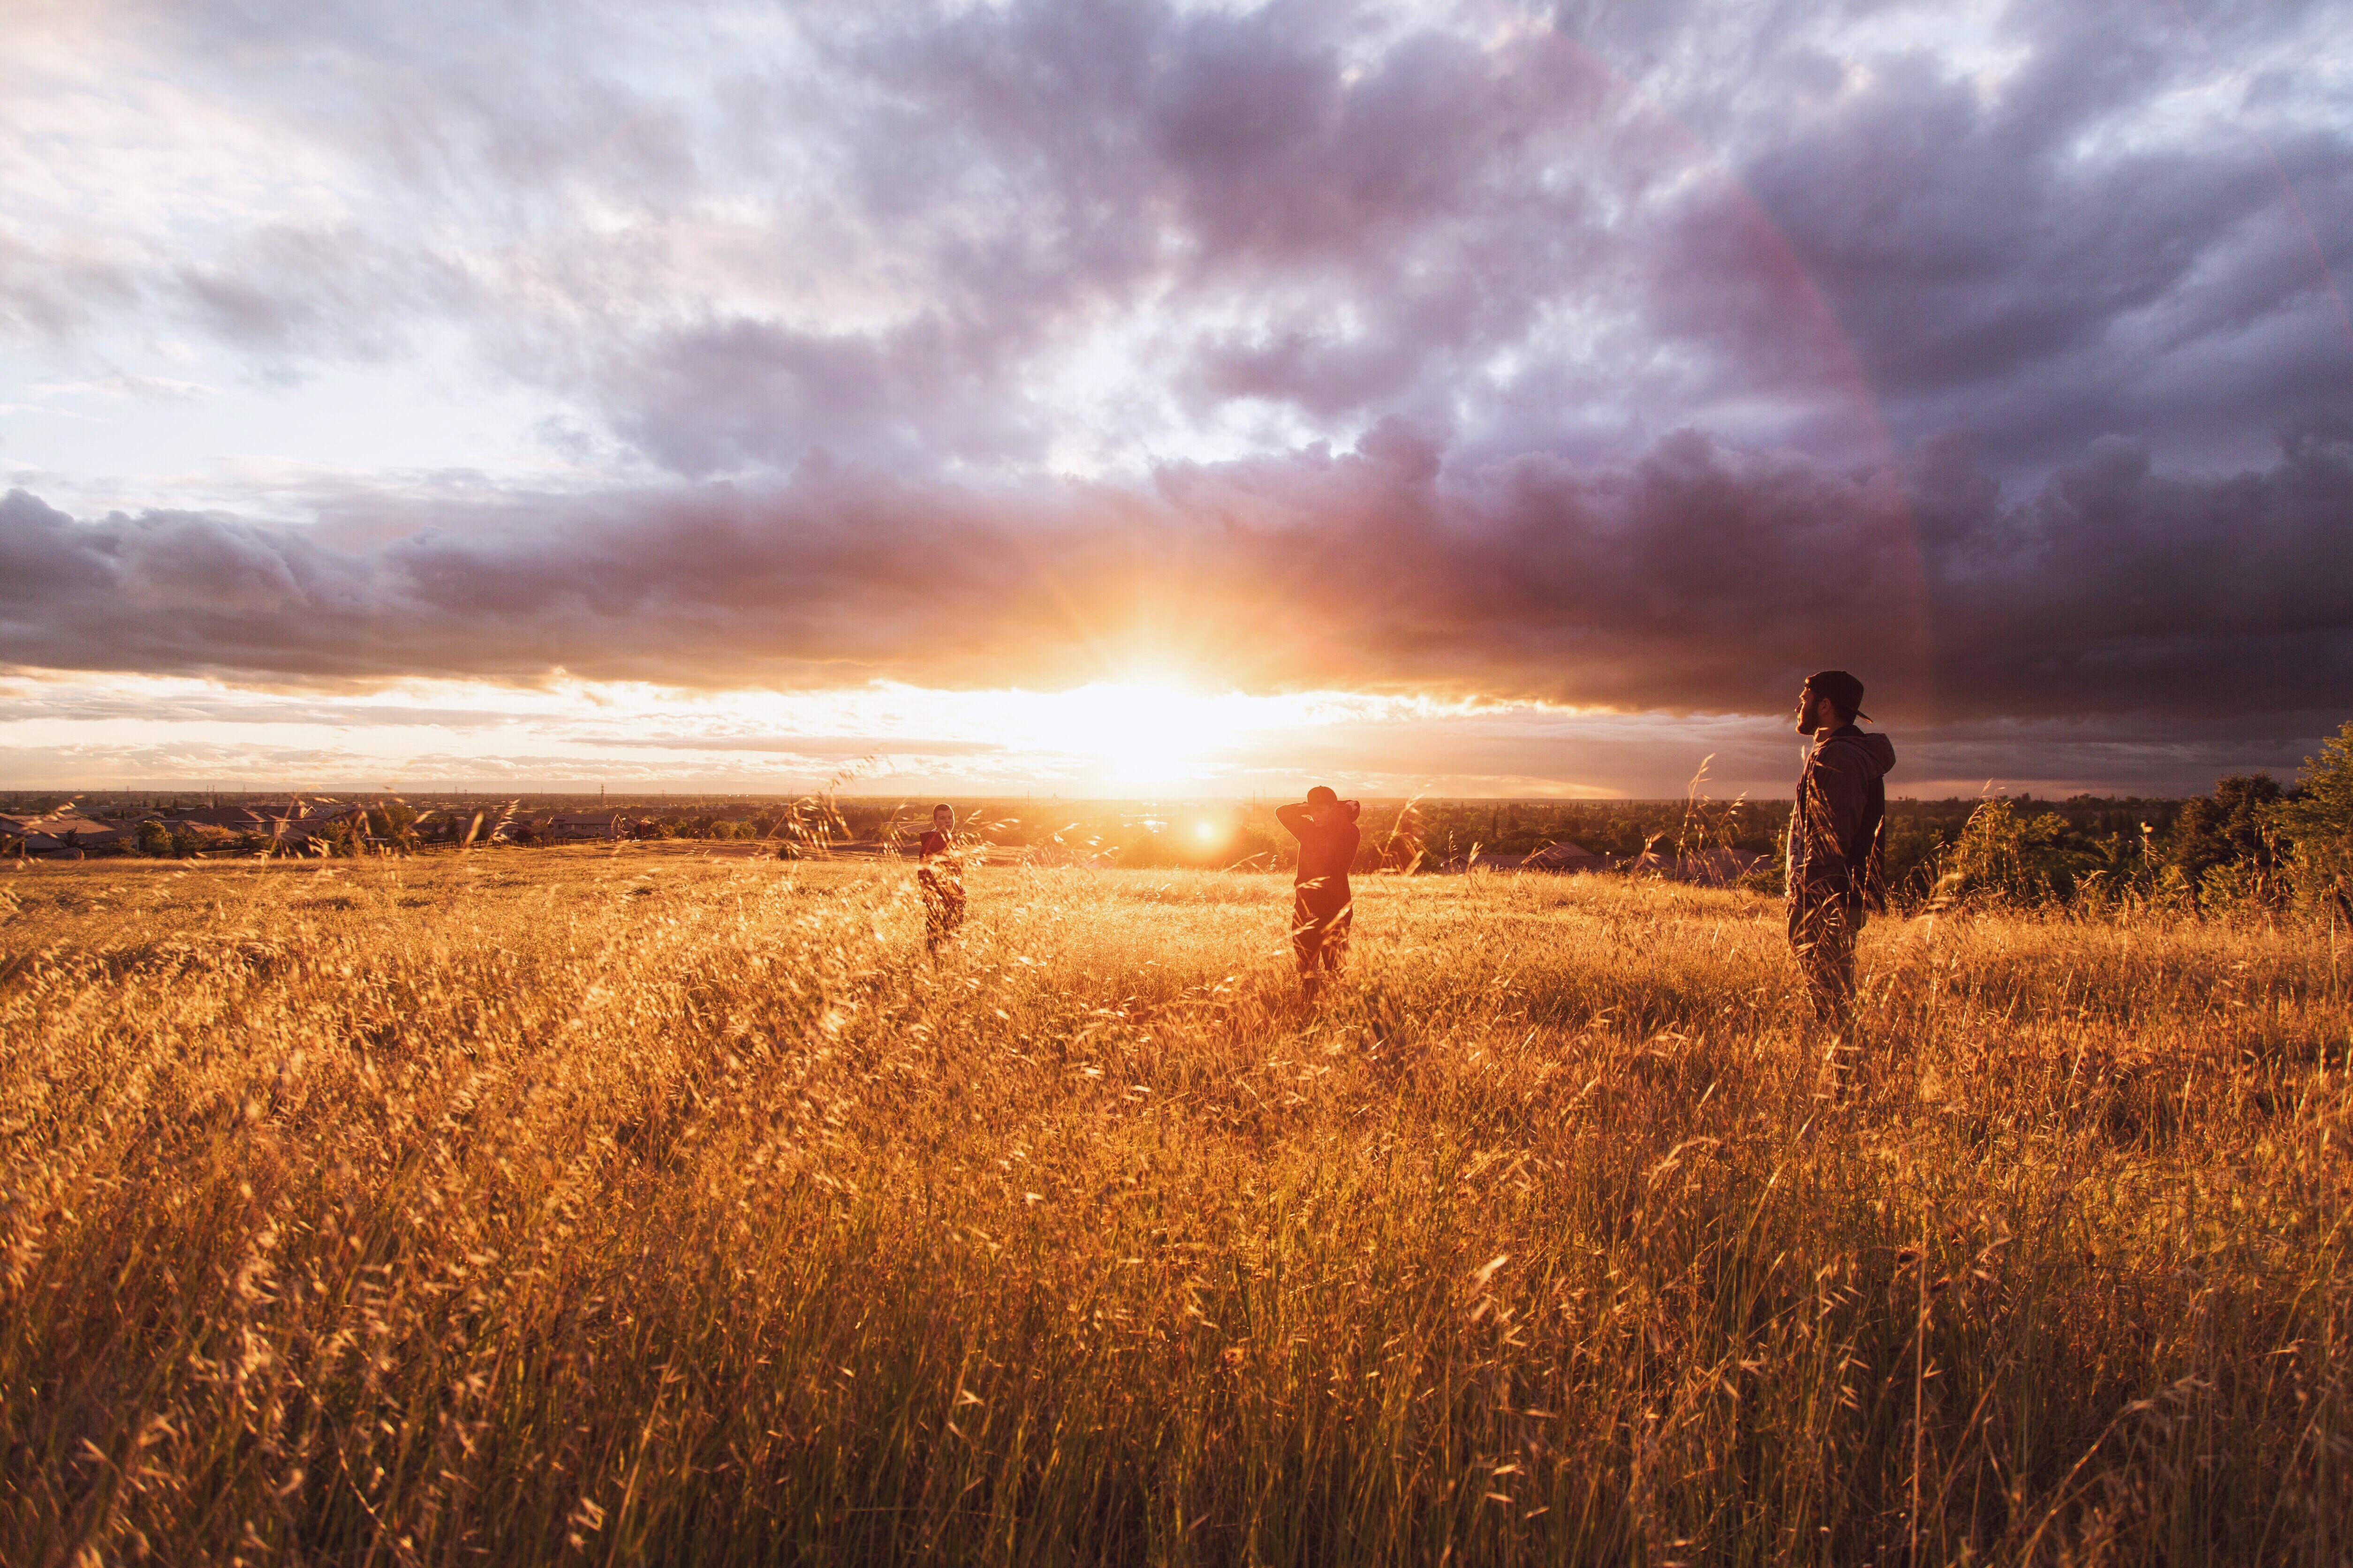 A family silhouetted against a golden sunset, standing together in a field of wheat. The focus of the image is on their togetherness, representing the strength and unity of a family. The warm colors of the sunset create a peaceful and calming atmosphere, suggesting the healing benefits of family therapy in Connecticut. The image evokes a sense of hope and the idea that with support and guidance, families can overcome challenges and build stronger relationships.